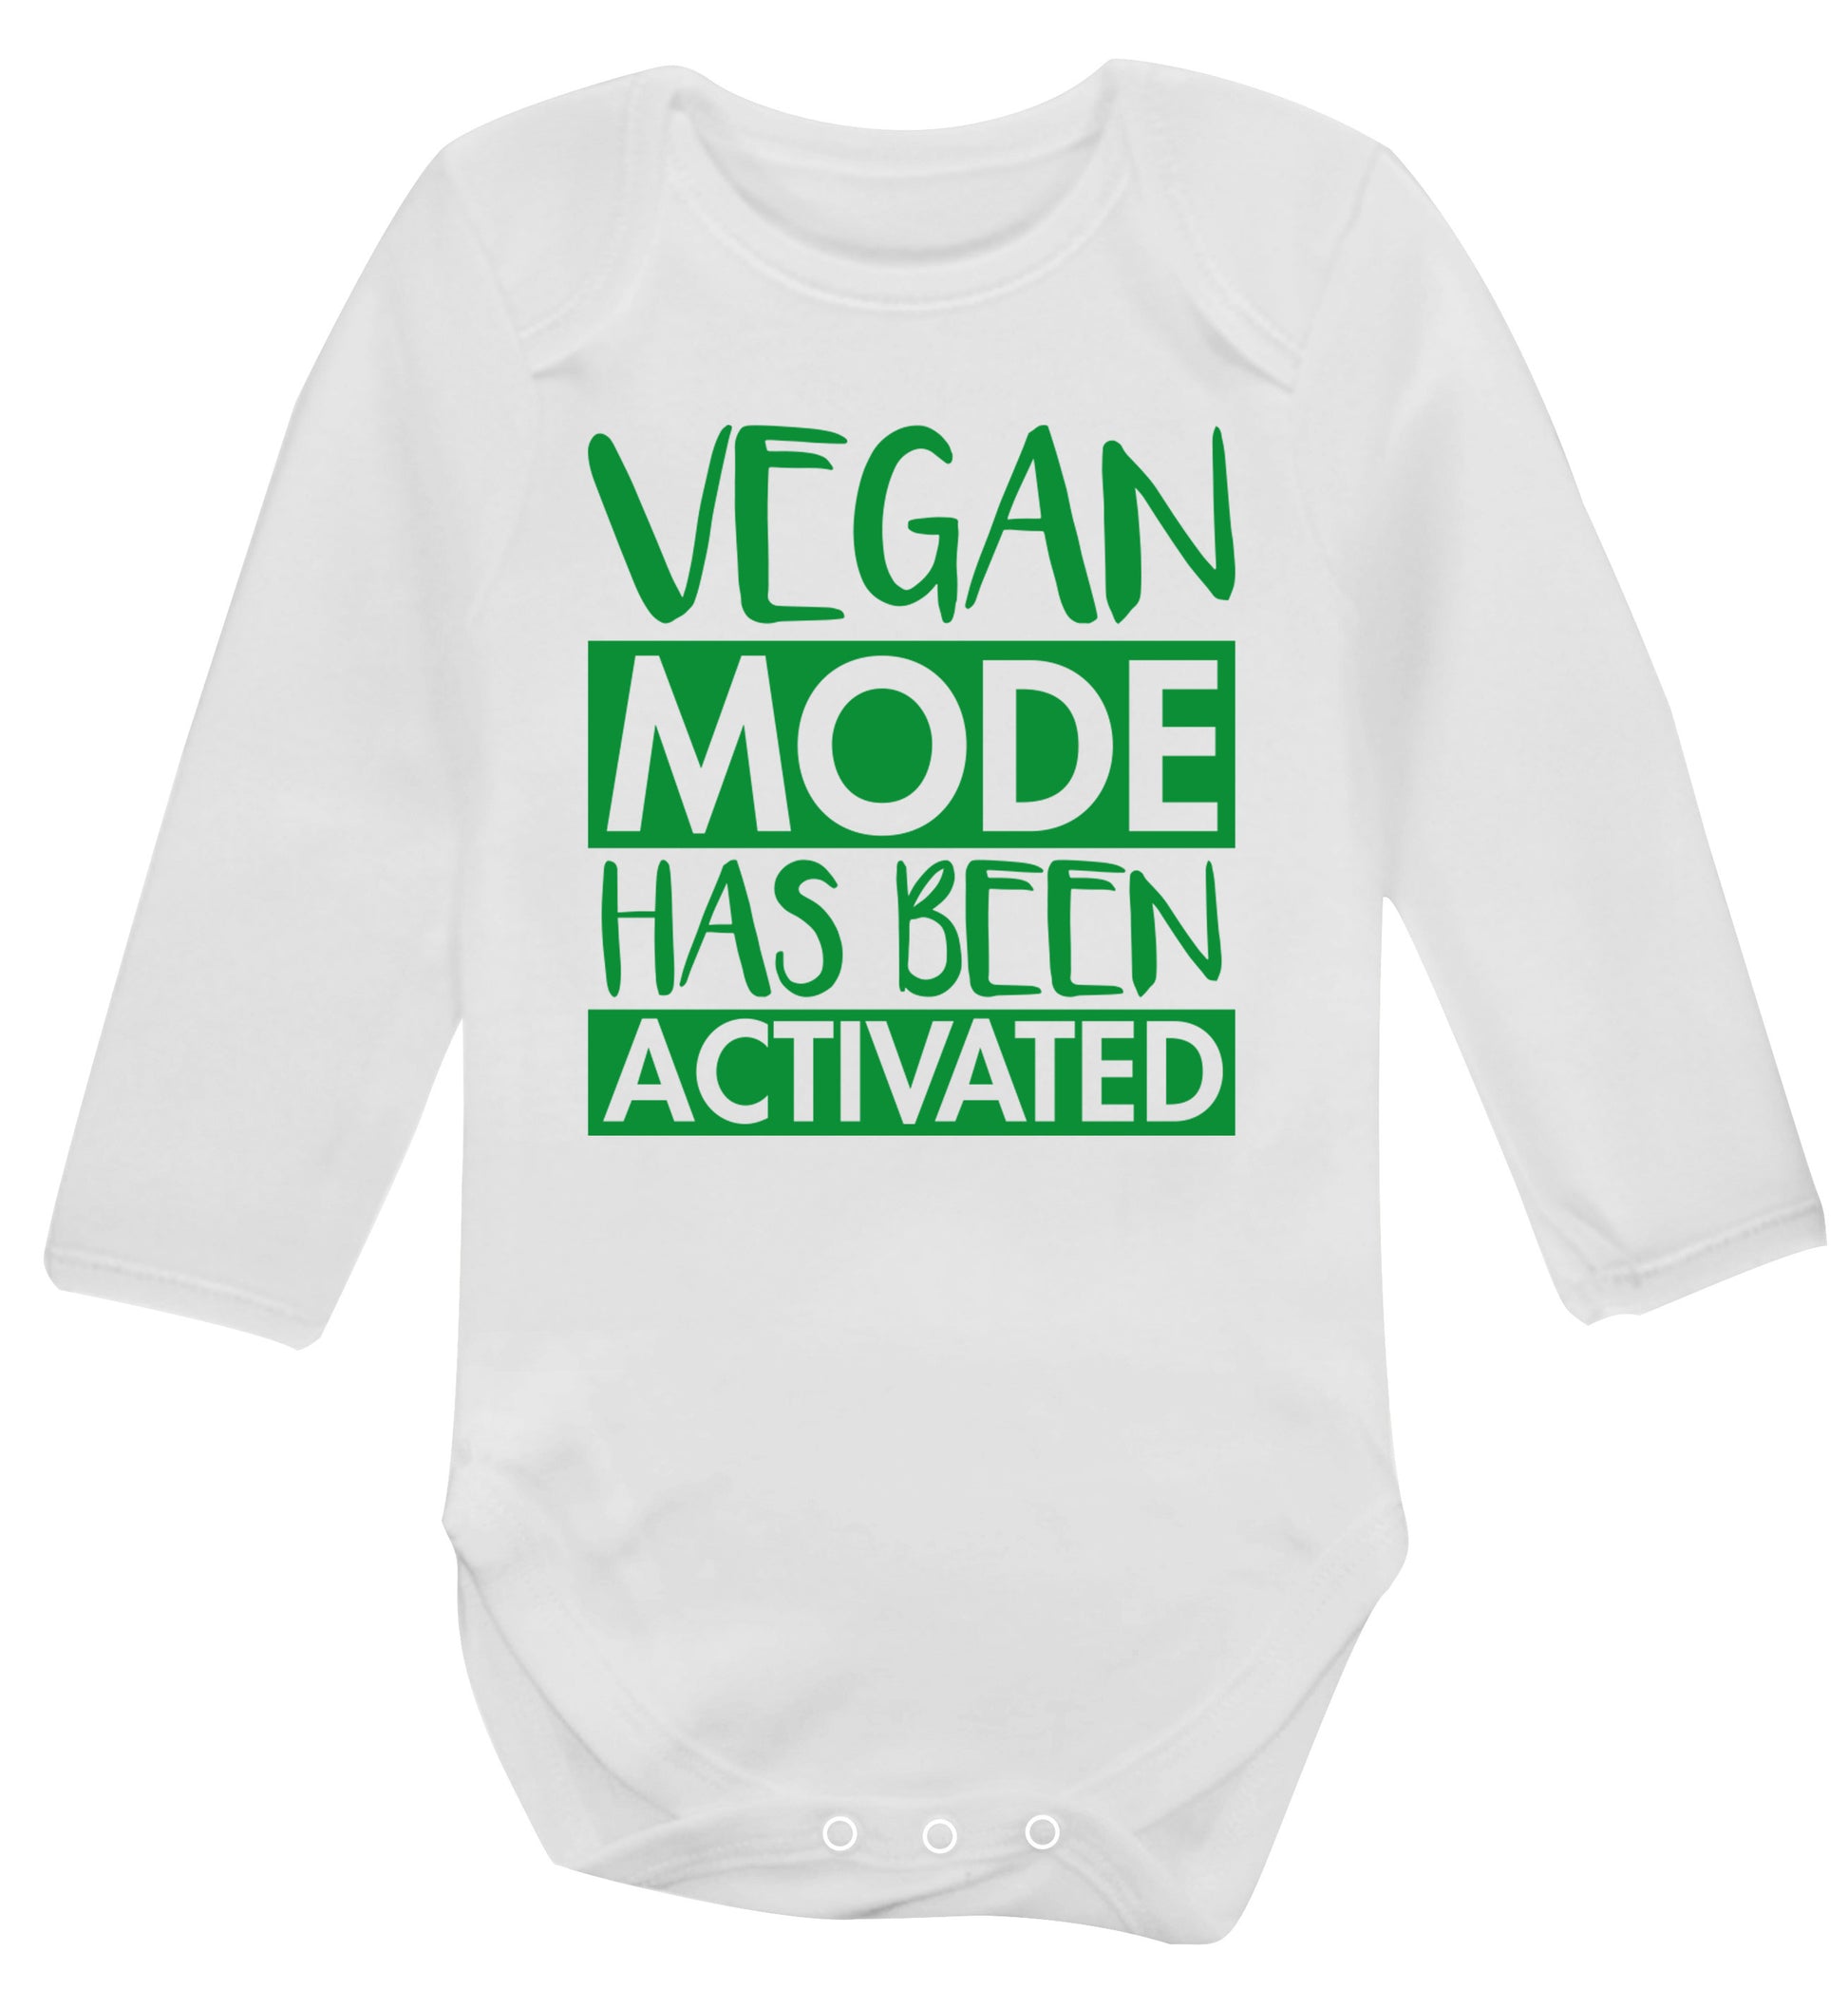 Vegan mode activated Baby Vest long sleeved white 6-12 months